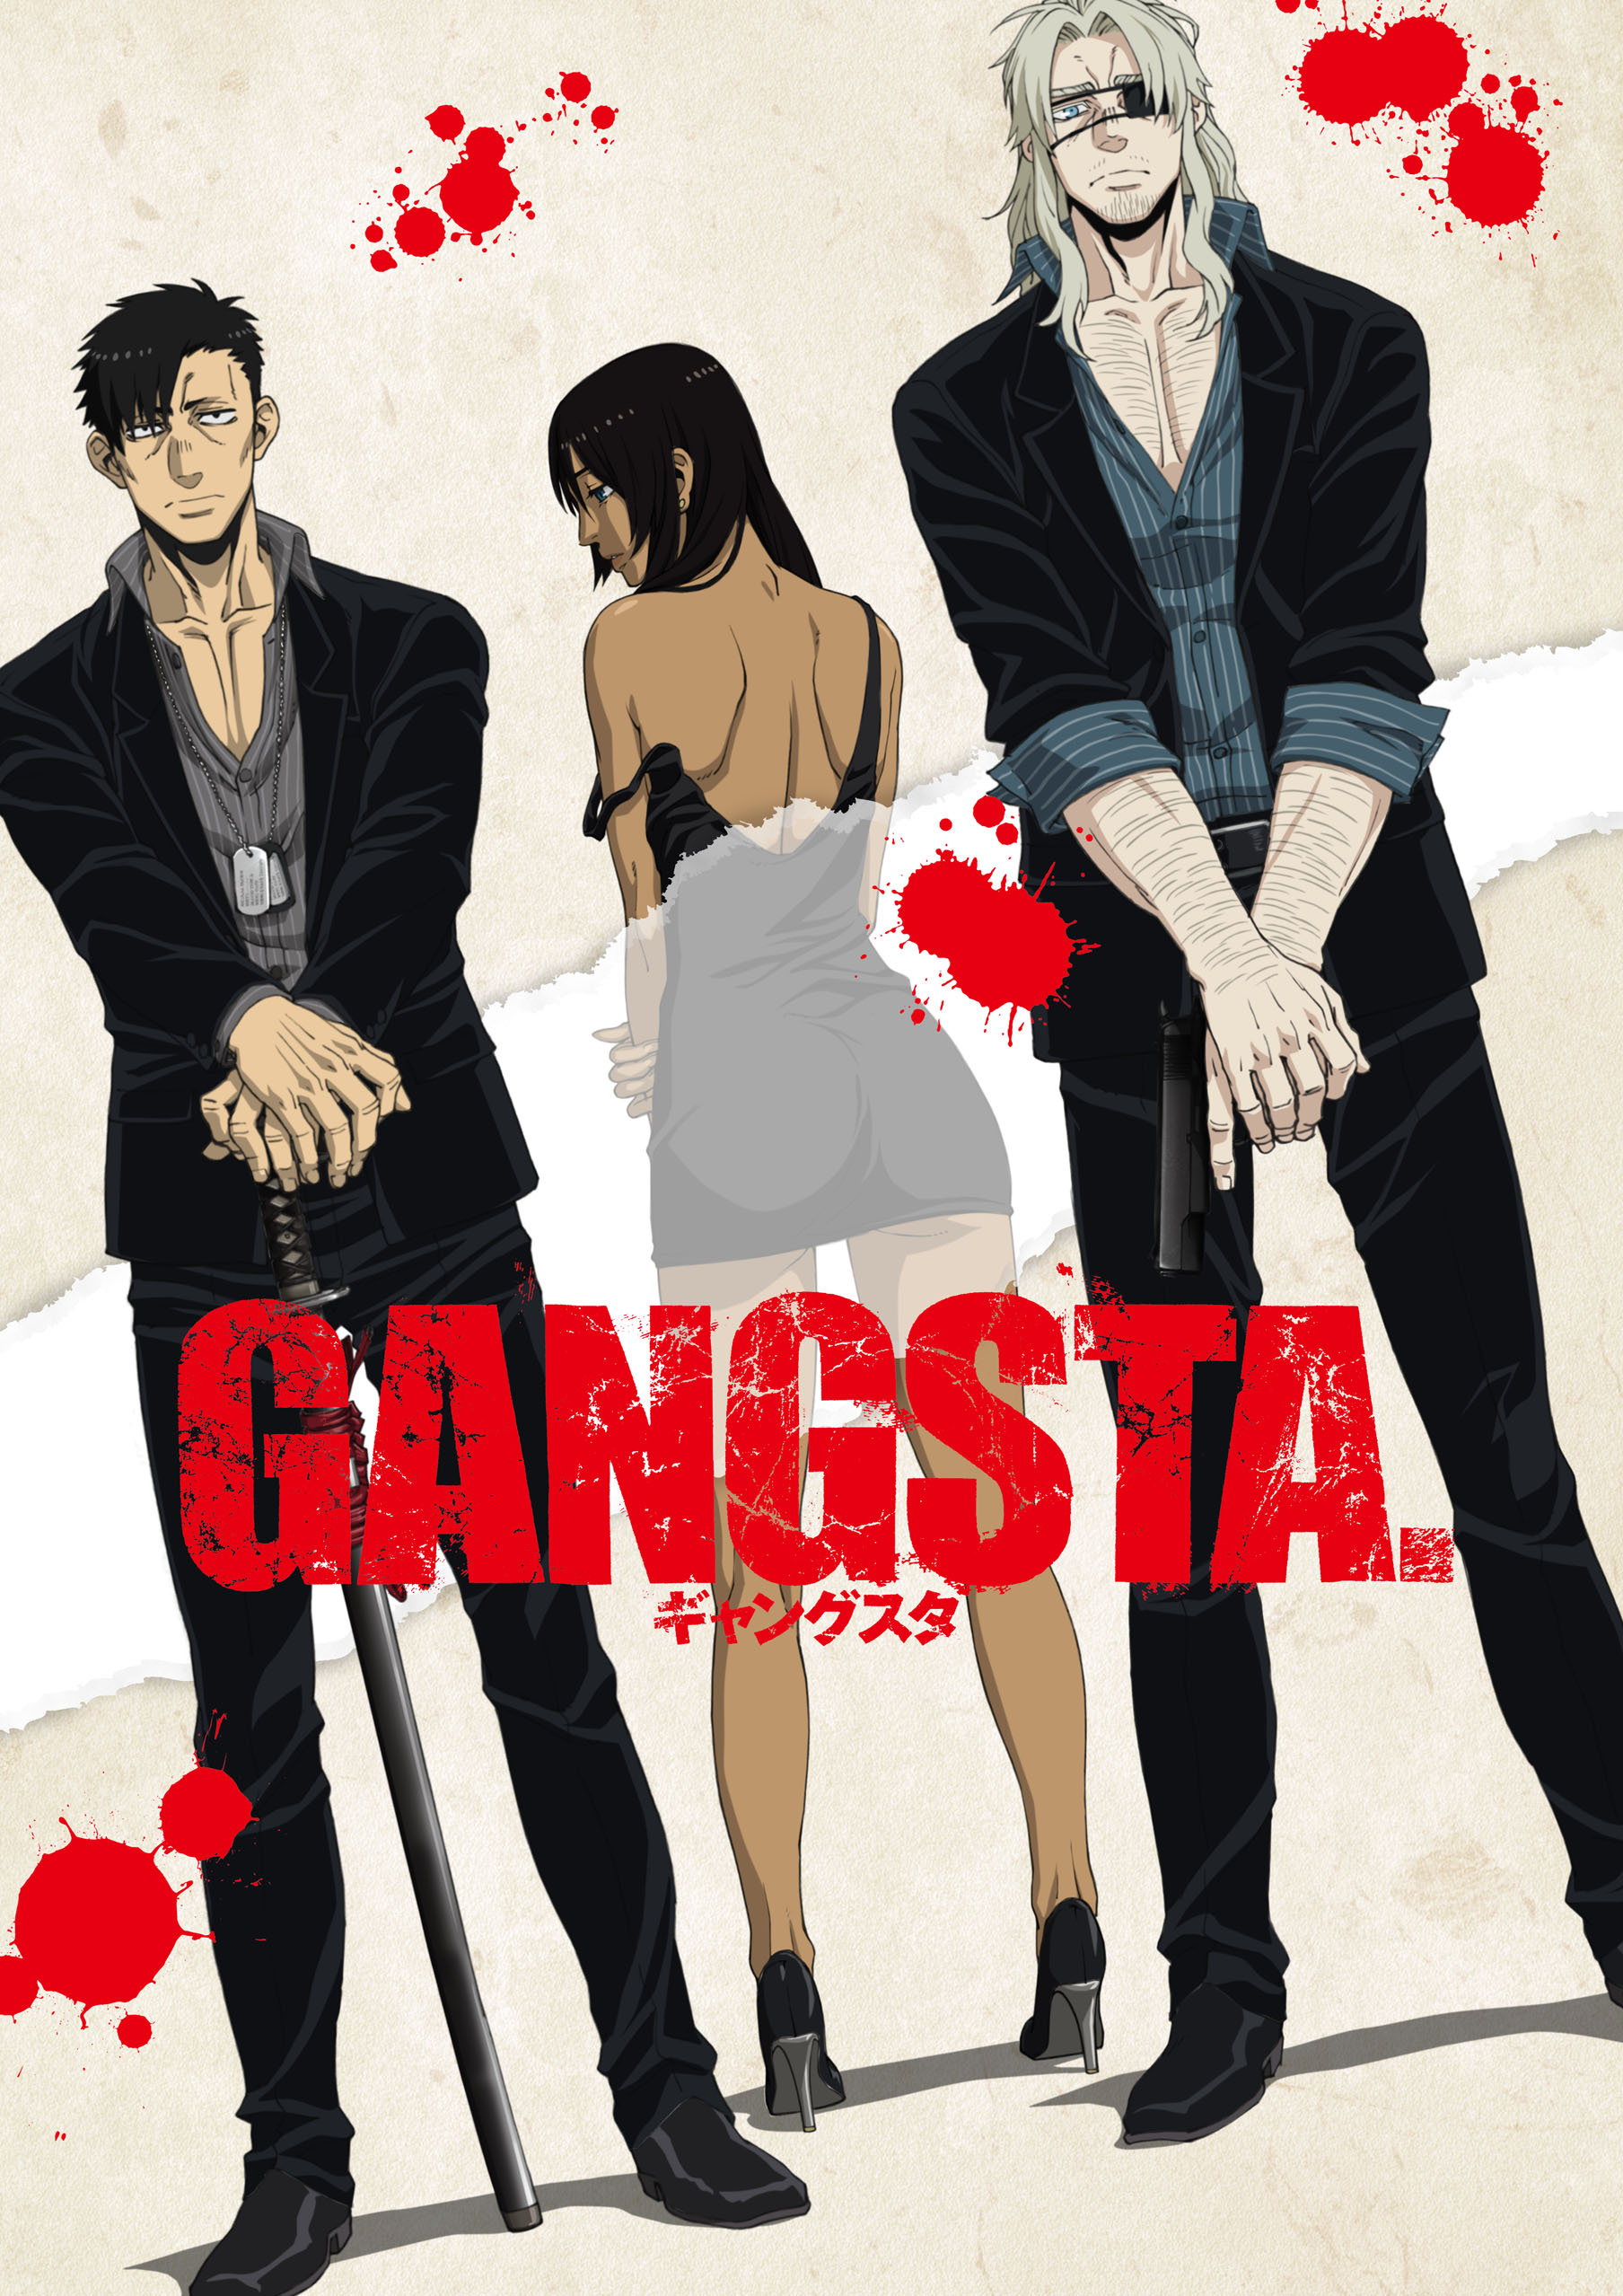 Gangster Anime Girl Pfp - Top 20 Gangster Anime Girl Profile Pictures, Pfp,  Avatar, Dp, icon [ HQ ]